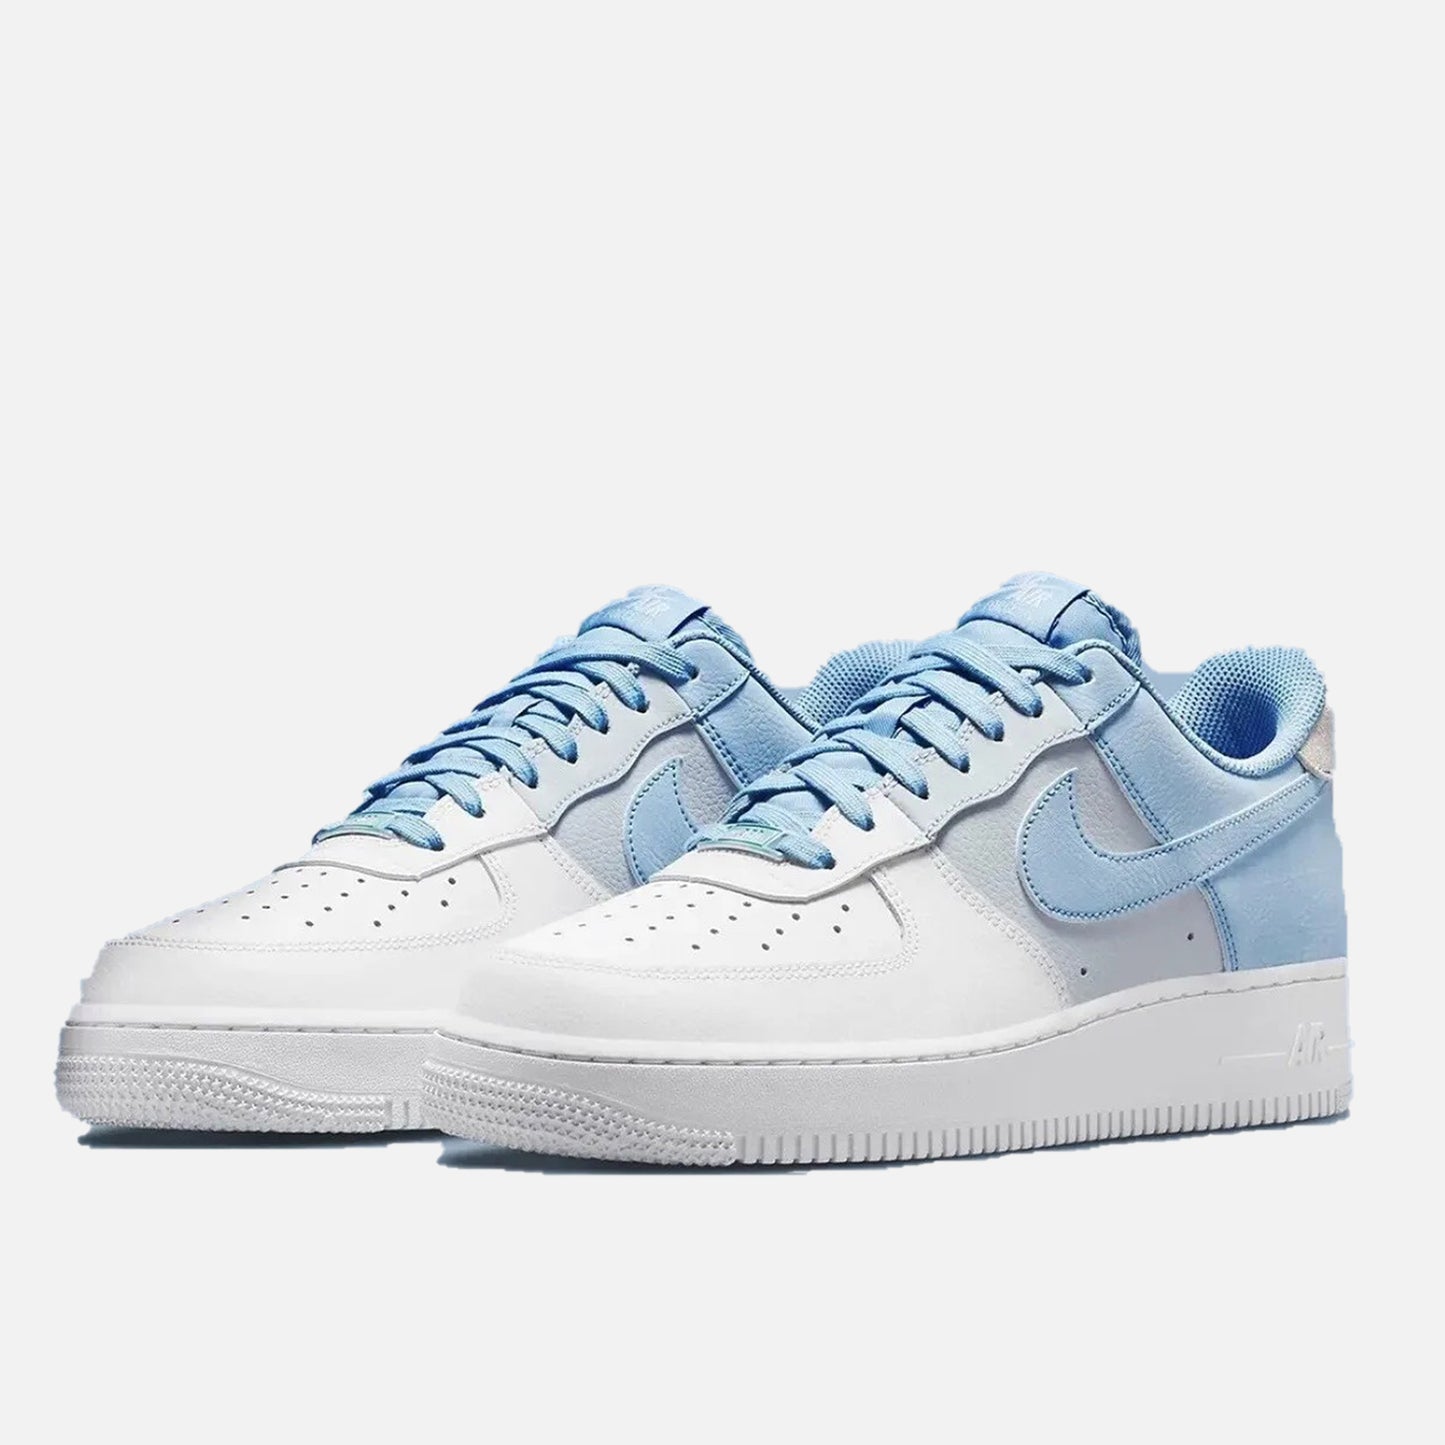 AIR FORCE ONE LOW PSYCHIC BLUE GREY